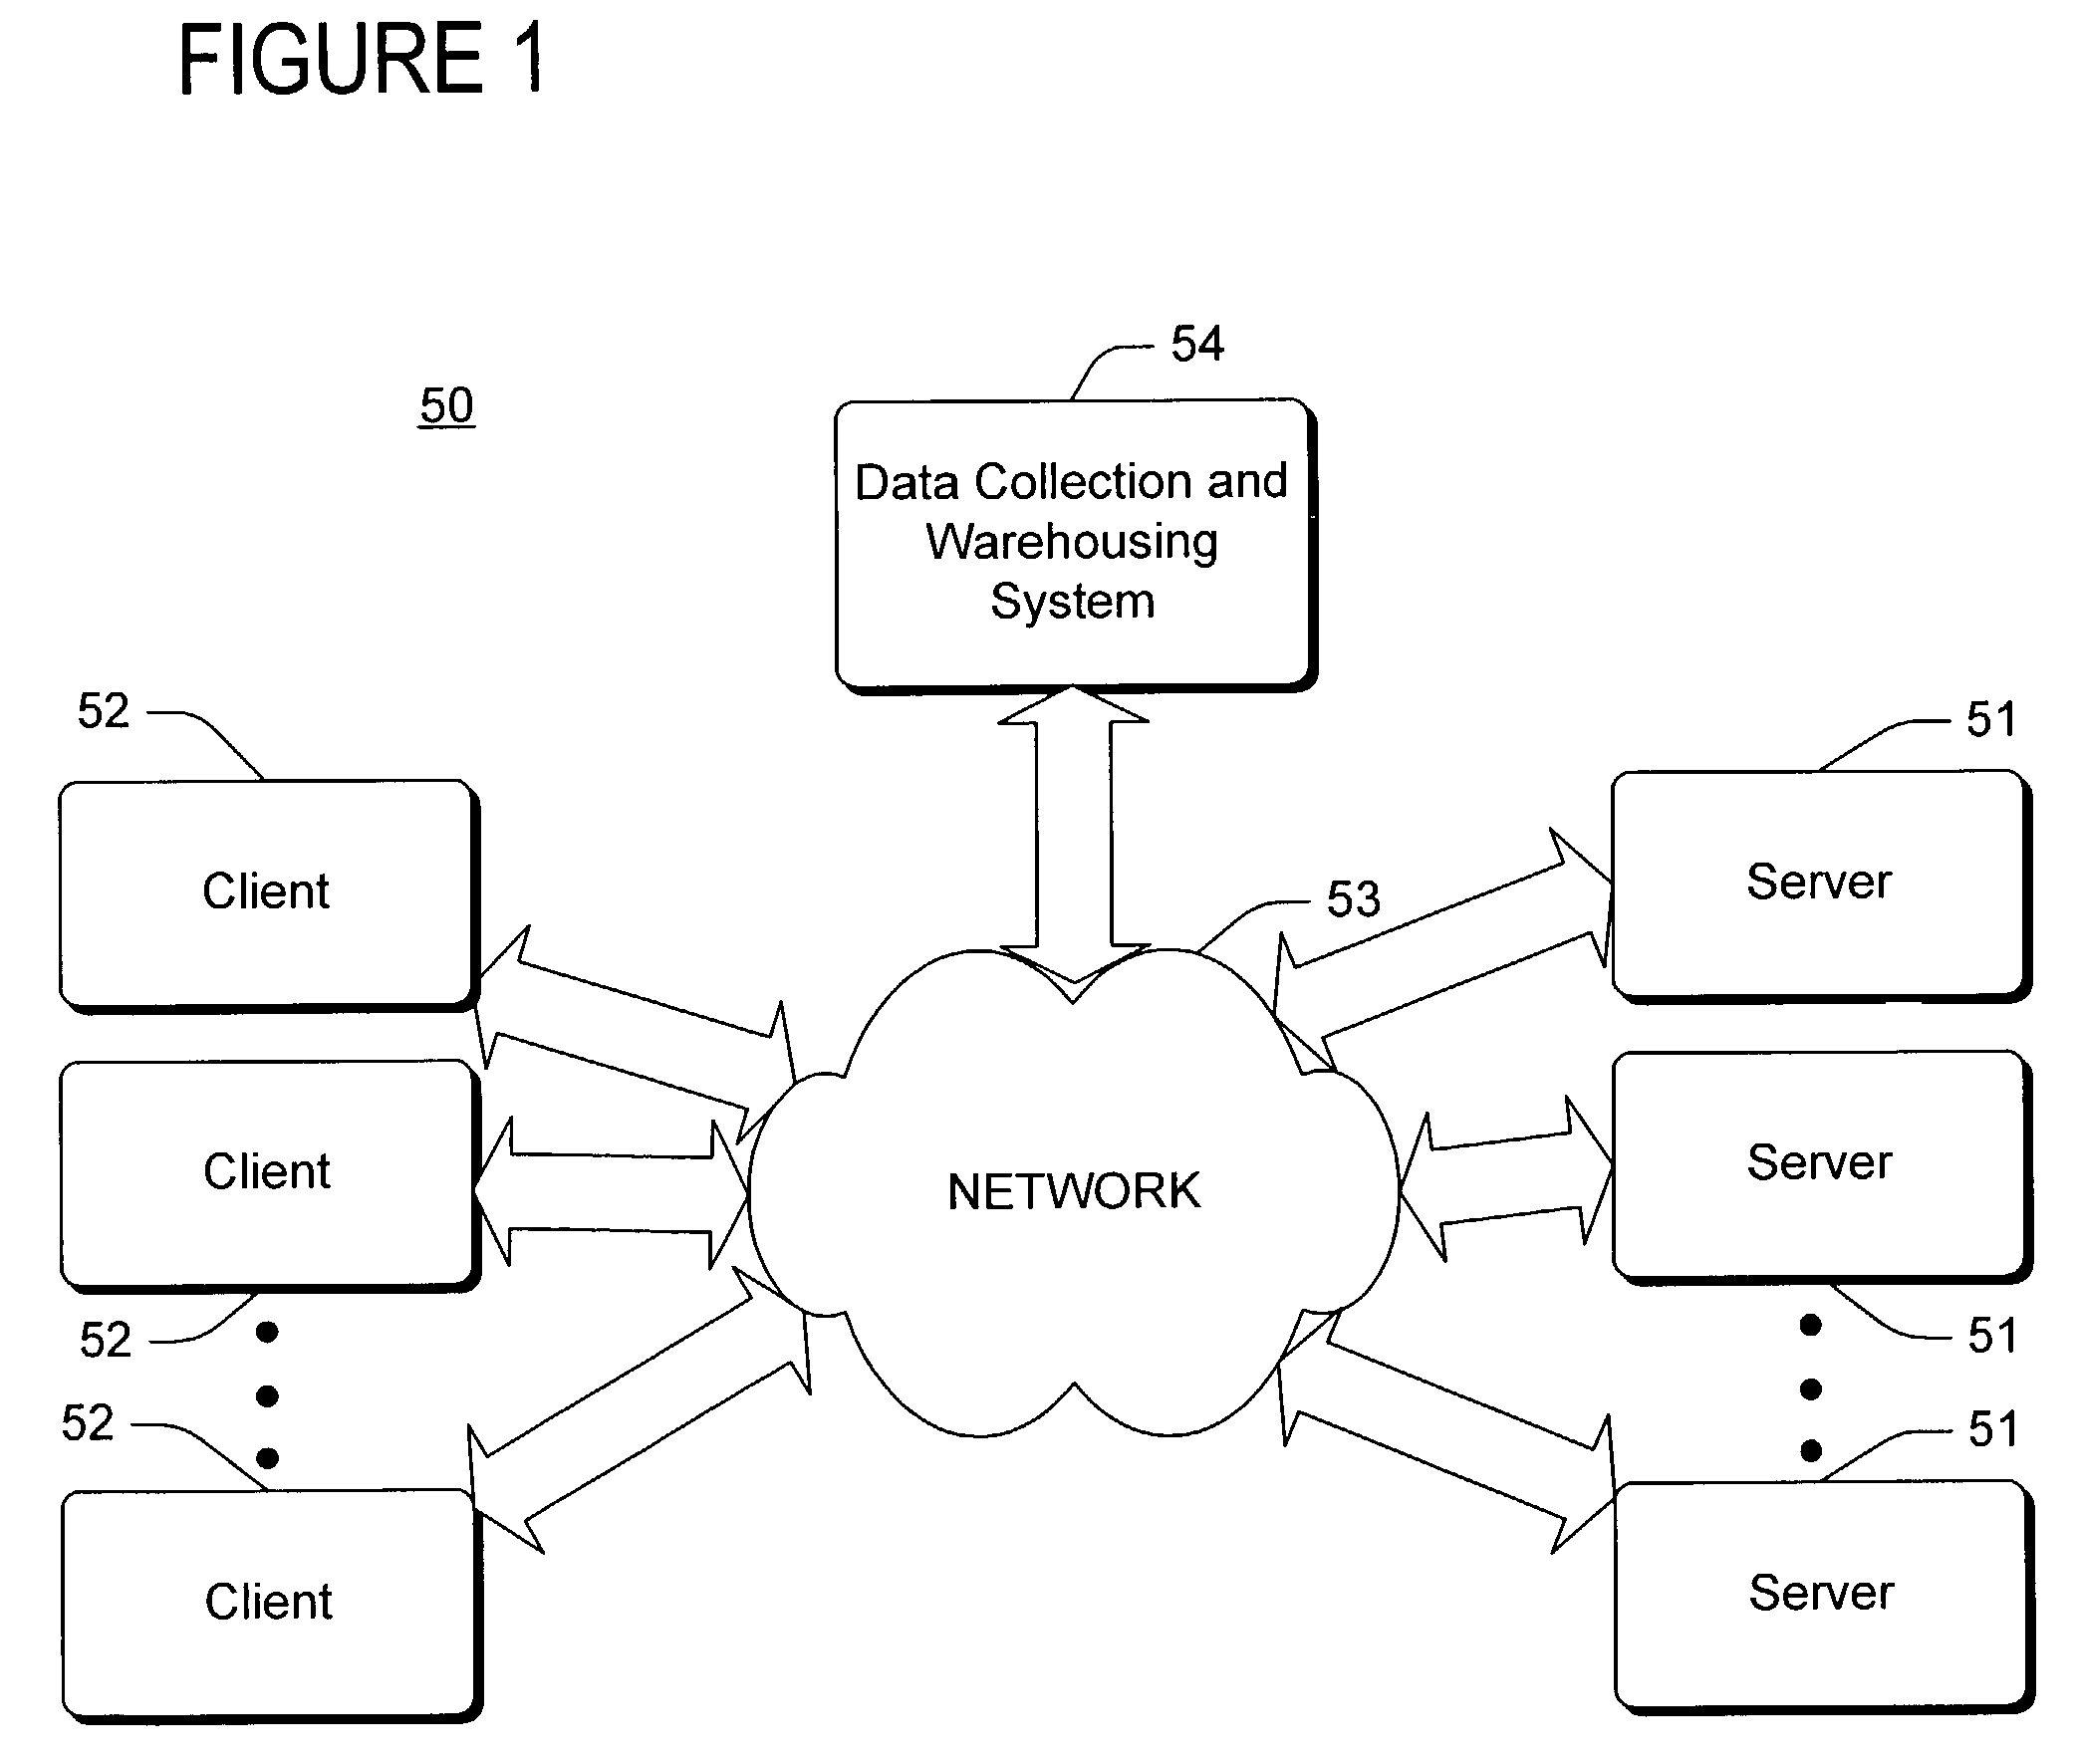 Method and system for developing extract transform load systems for data warehouses